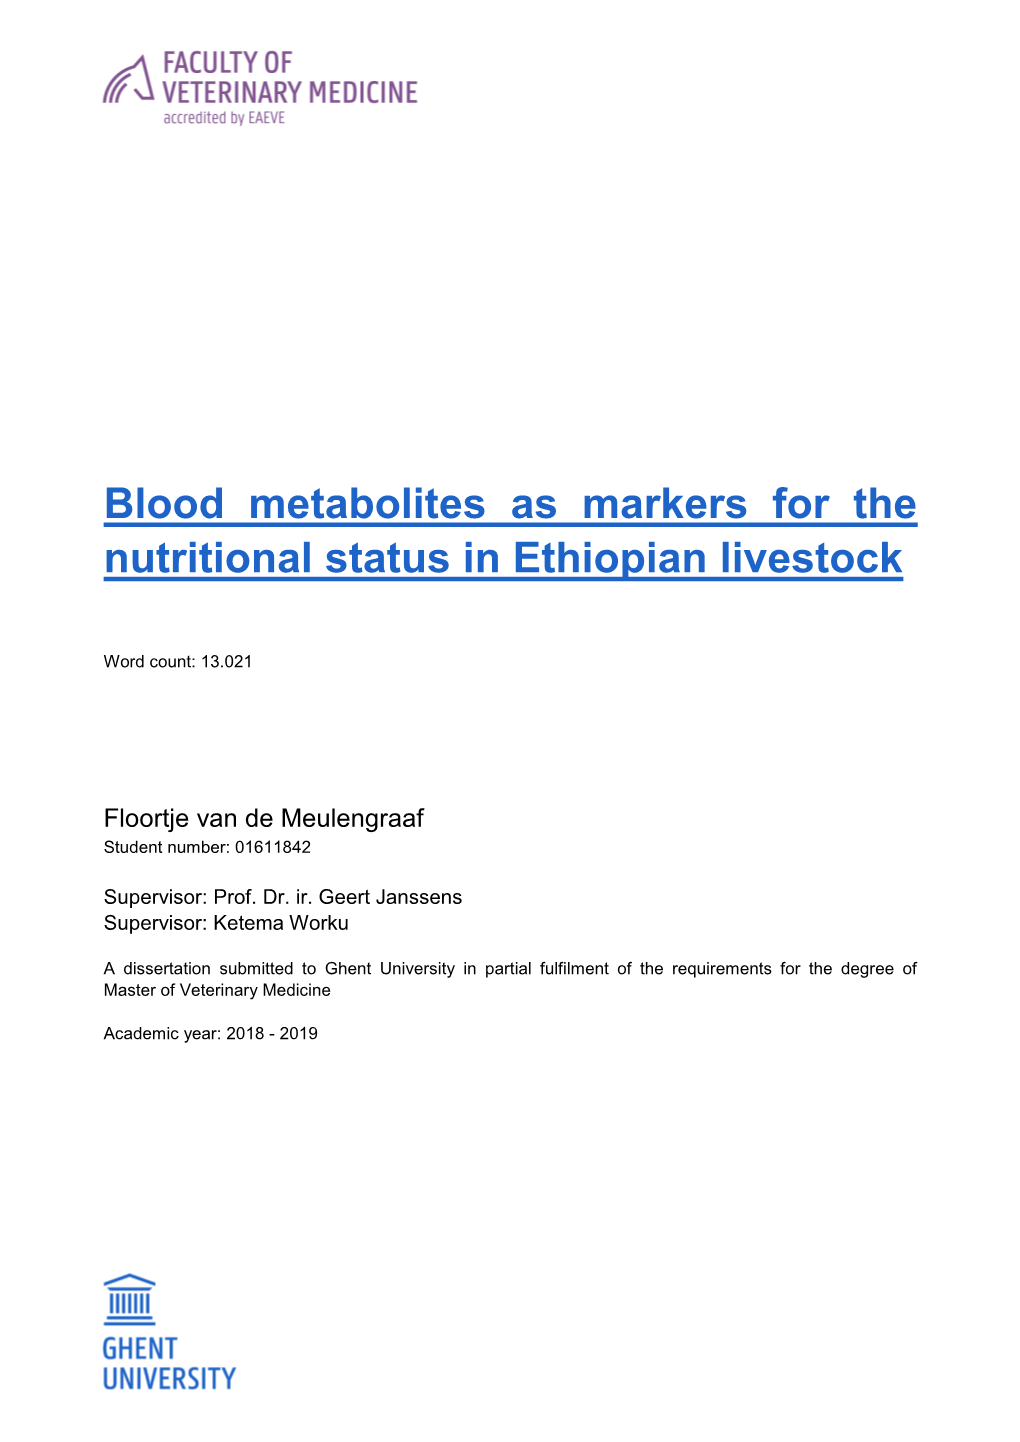 Blood Metabolites As Markers for the Nutritional Status in Ethiopian Livestock